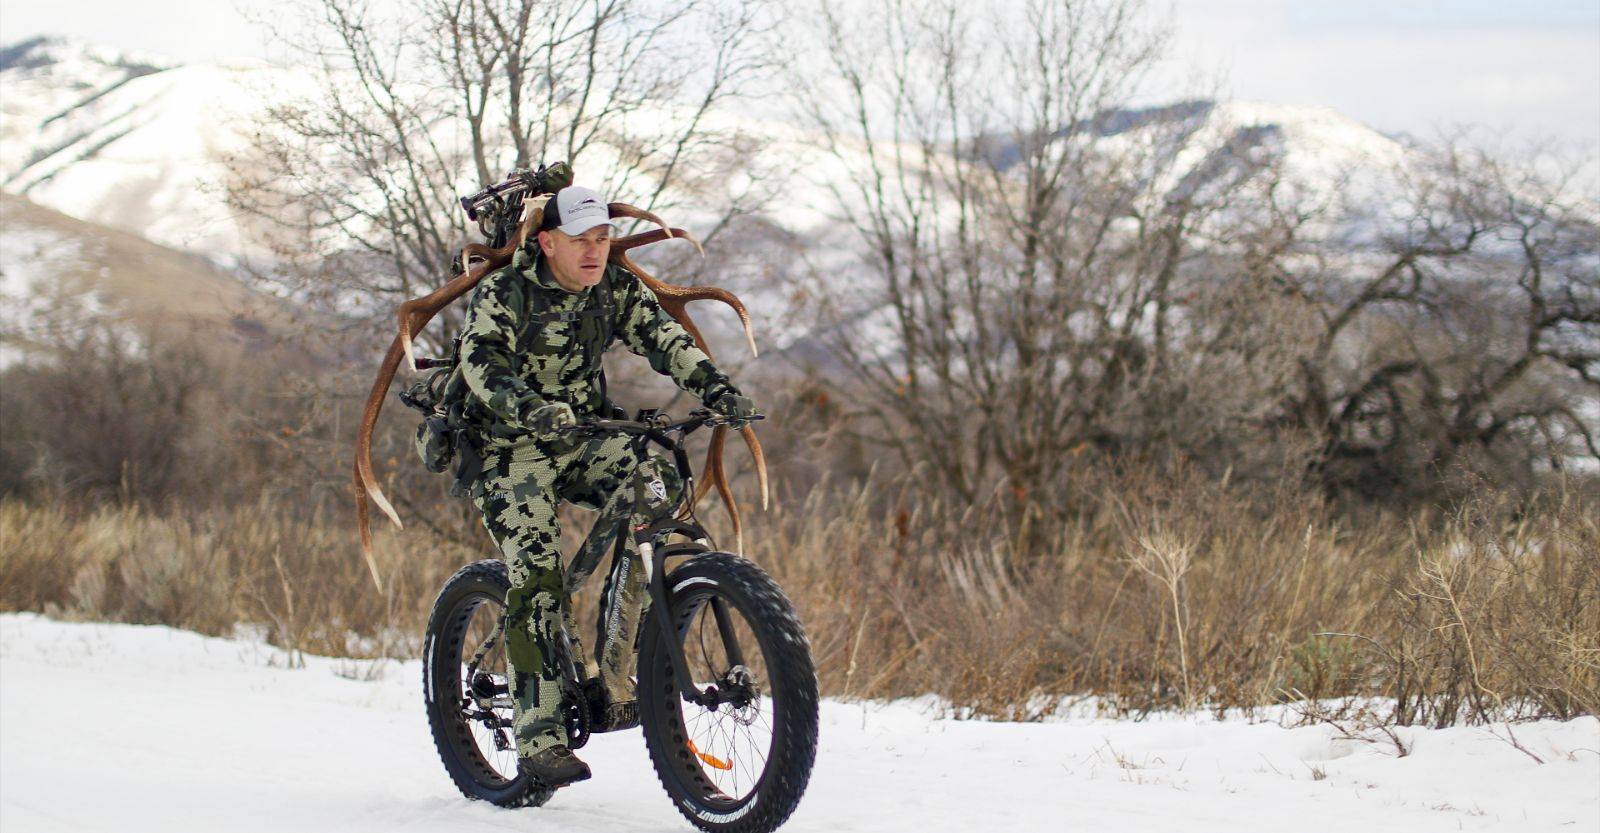 eBike Winter Riding Tips: From Snow to Cold, Hunt Safer